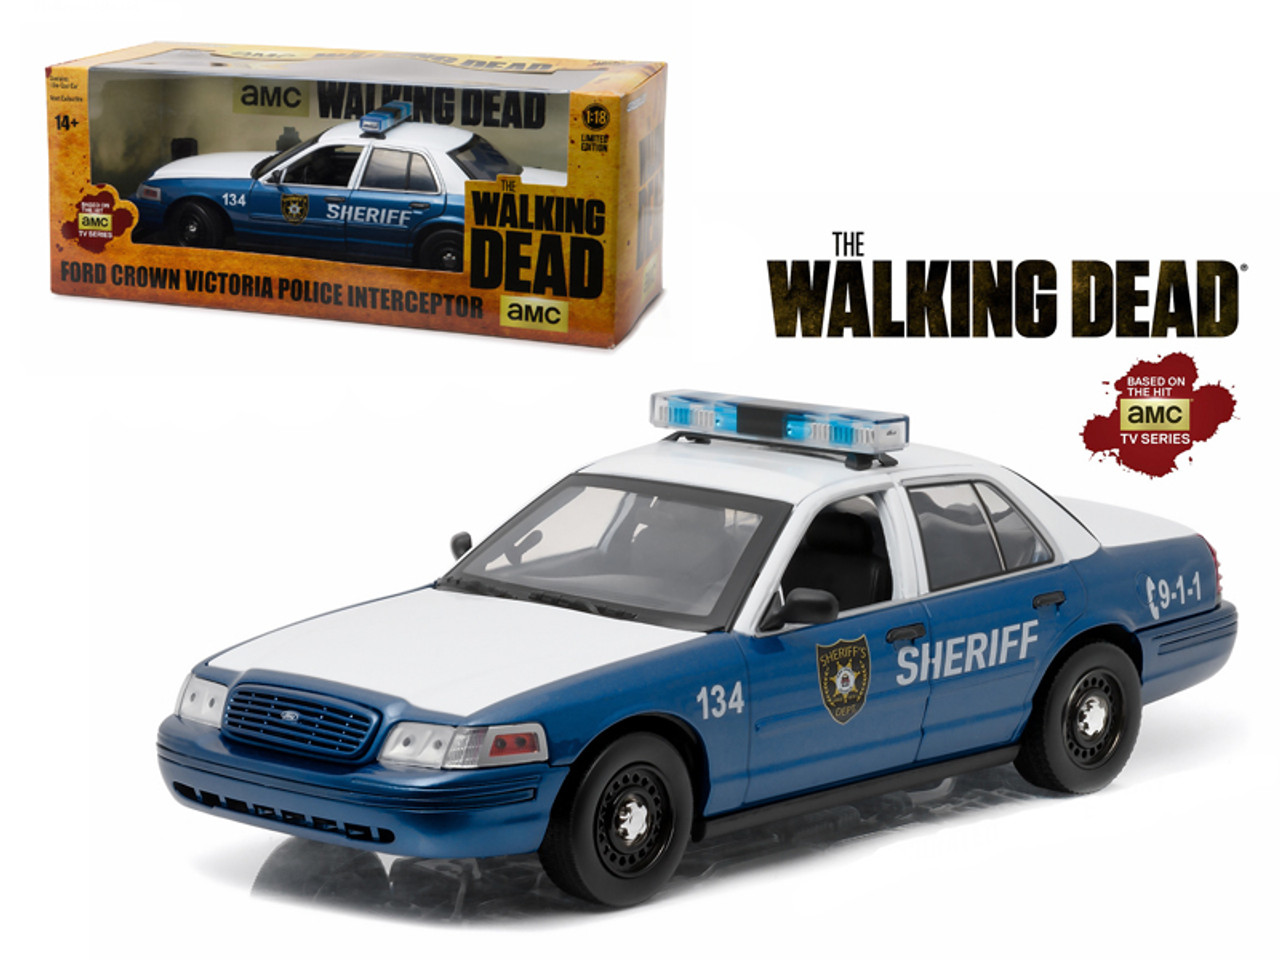 Rick and Shane's 2001 Ford Crown Victoria Police Interceptor "The Walking Dead" (2010-2015 TV Series) 1/18 Diecast Model Car by Greenlight